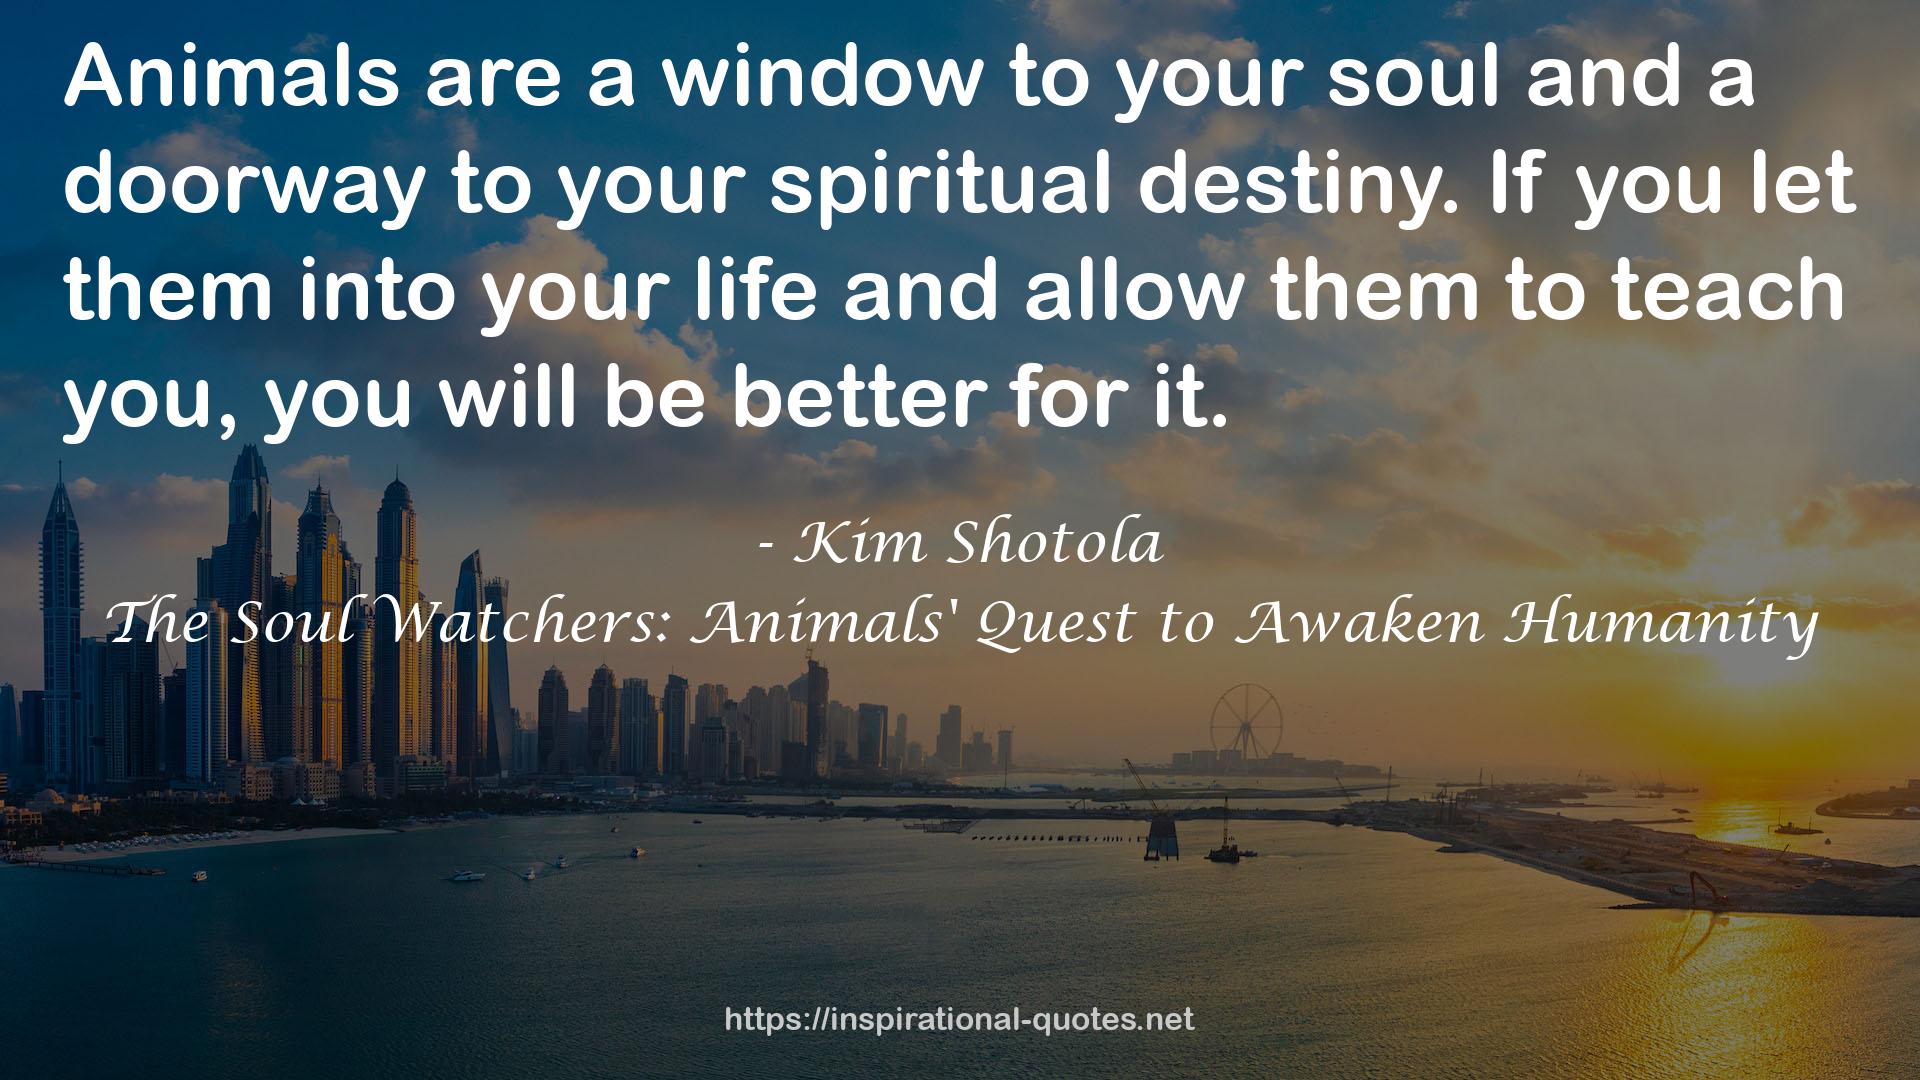 The Soul Watchers: Animals' Quest to Awaken Humanity QUOTES